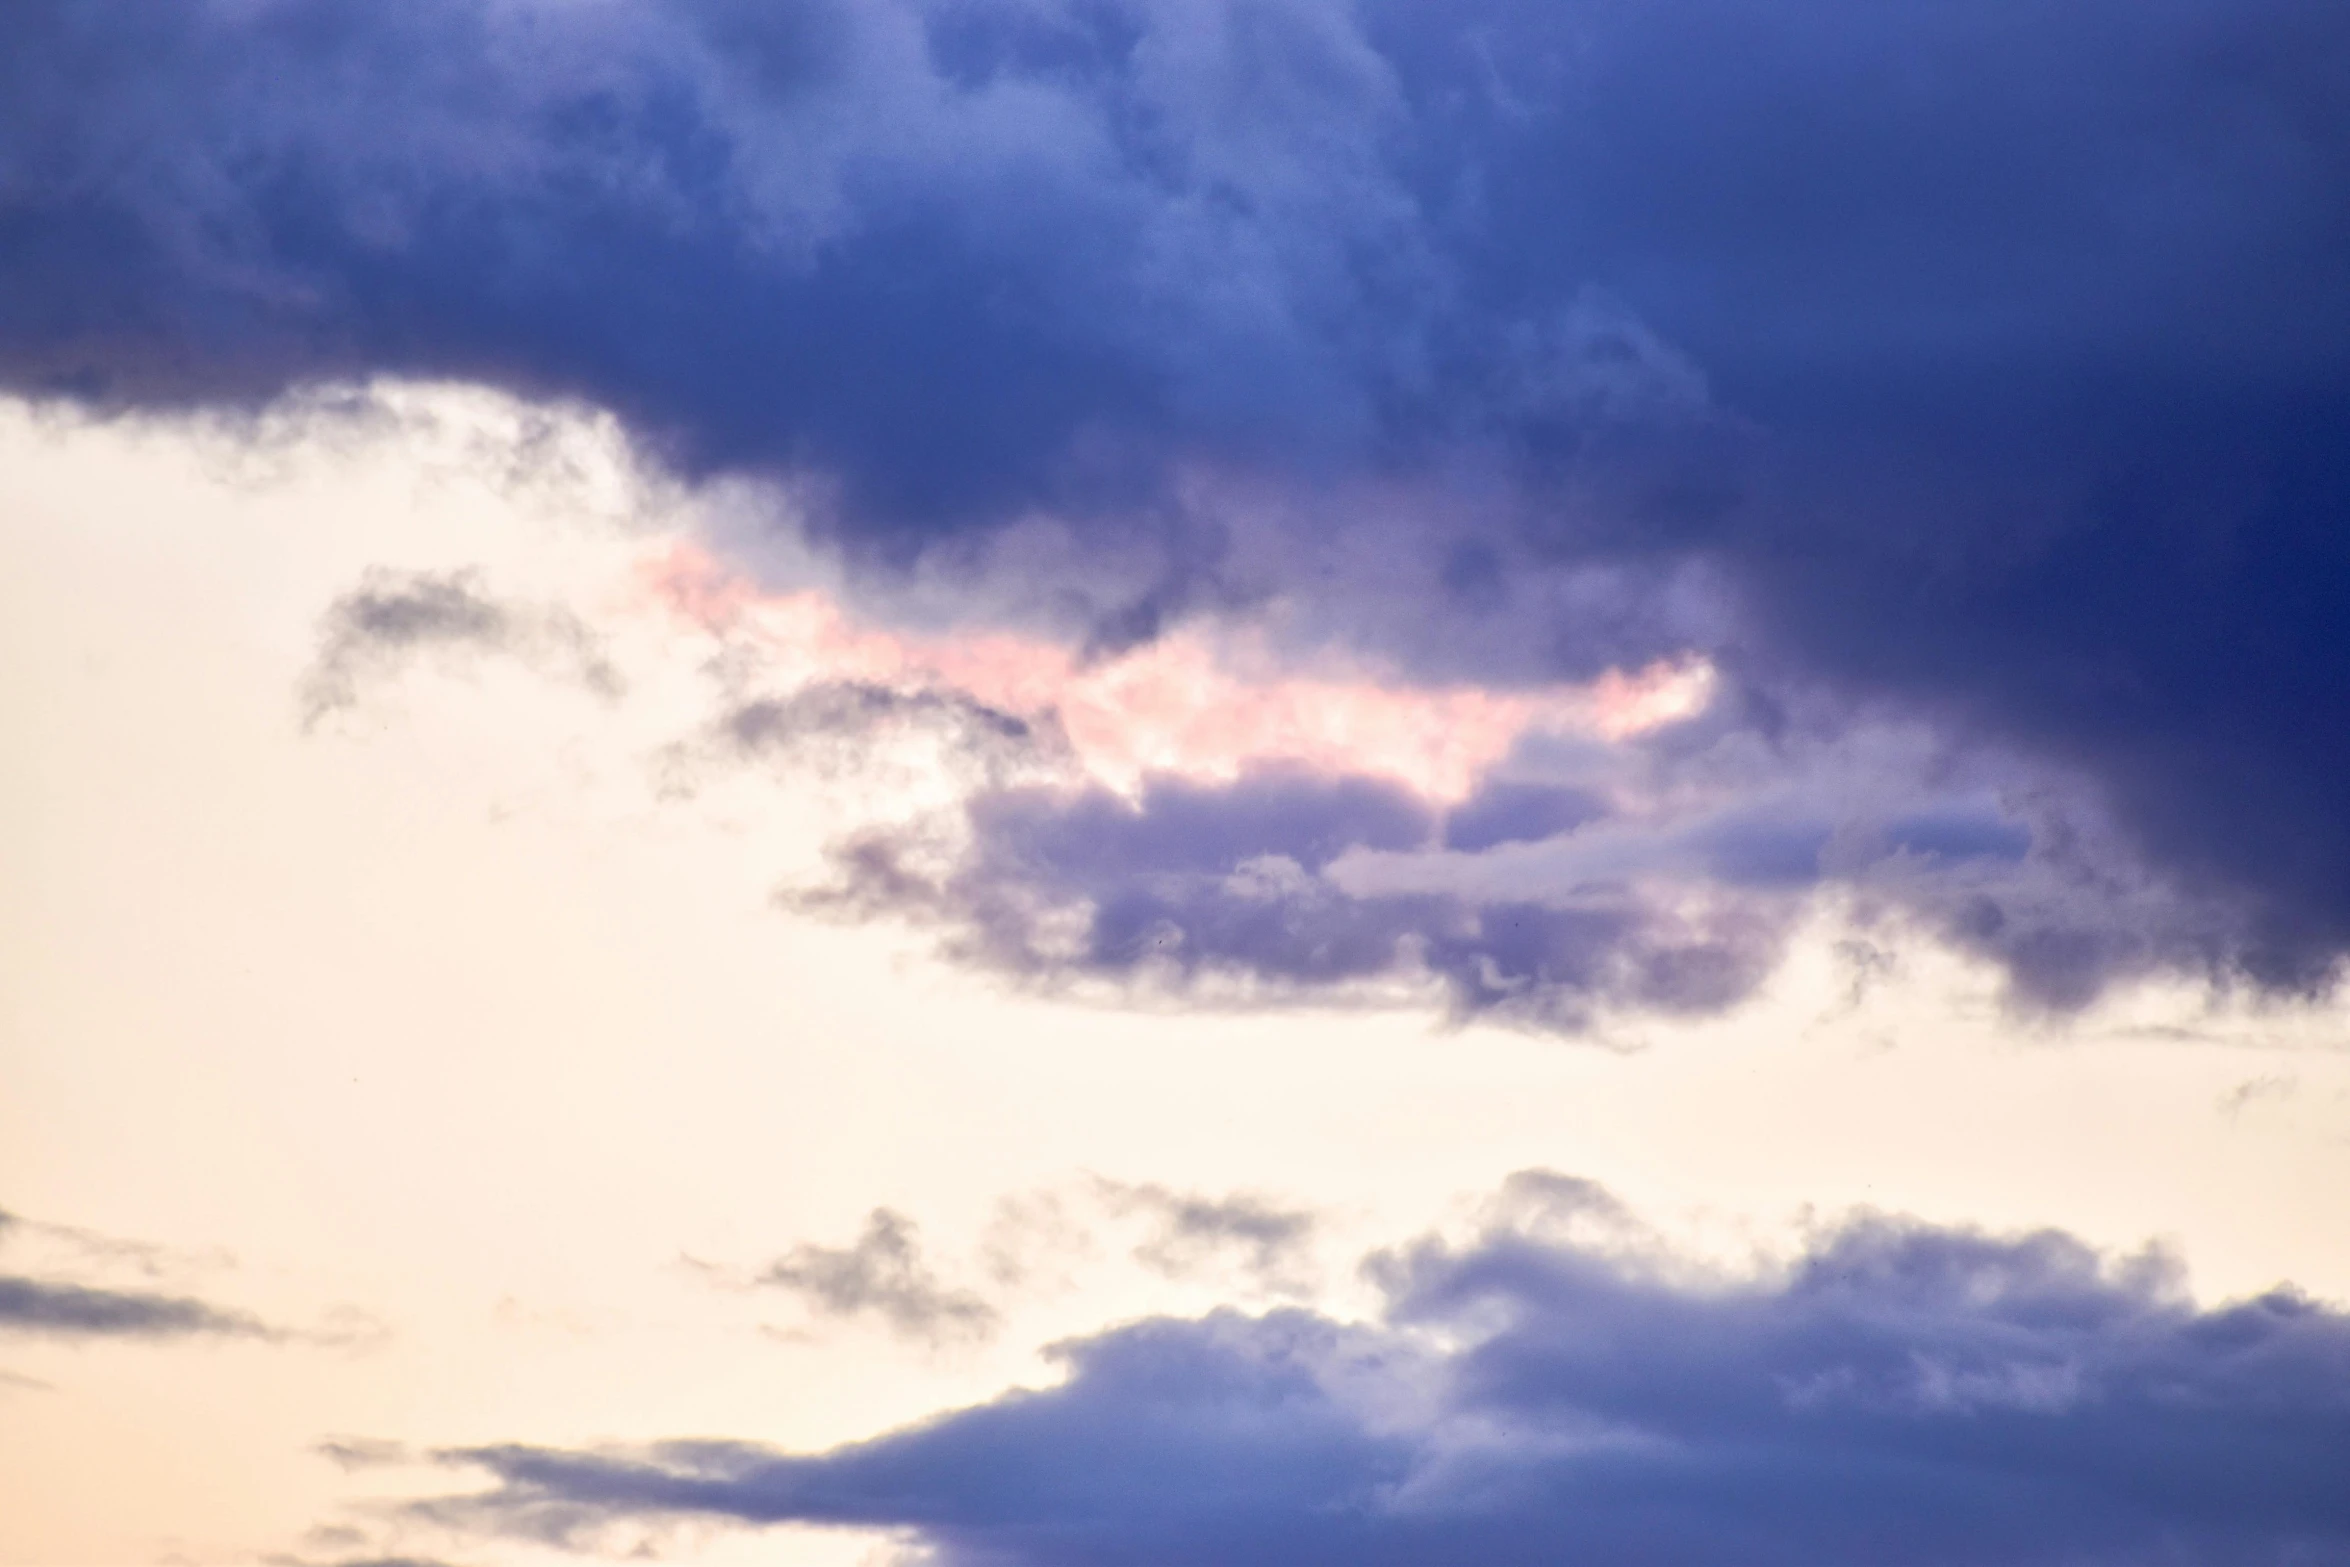 there is a plane that is flying in the sky, by Carey Morris, unsplash, romanticism, soft lilac skies, evening storm, close - up photograph, blue and pink shift